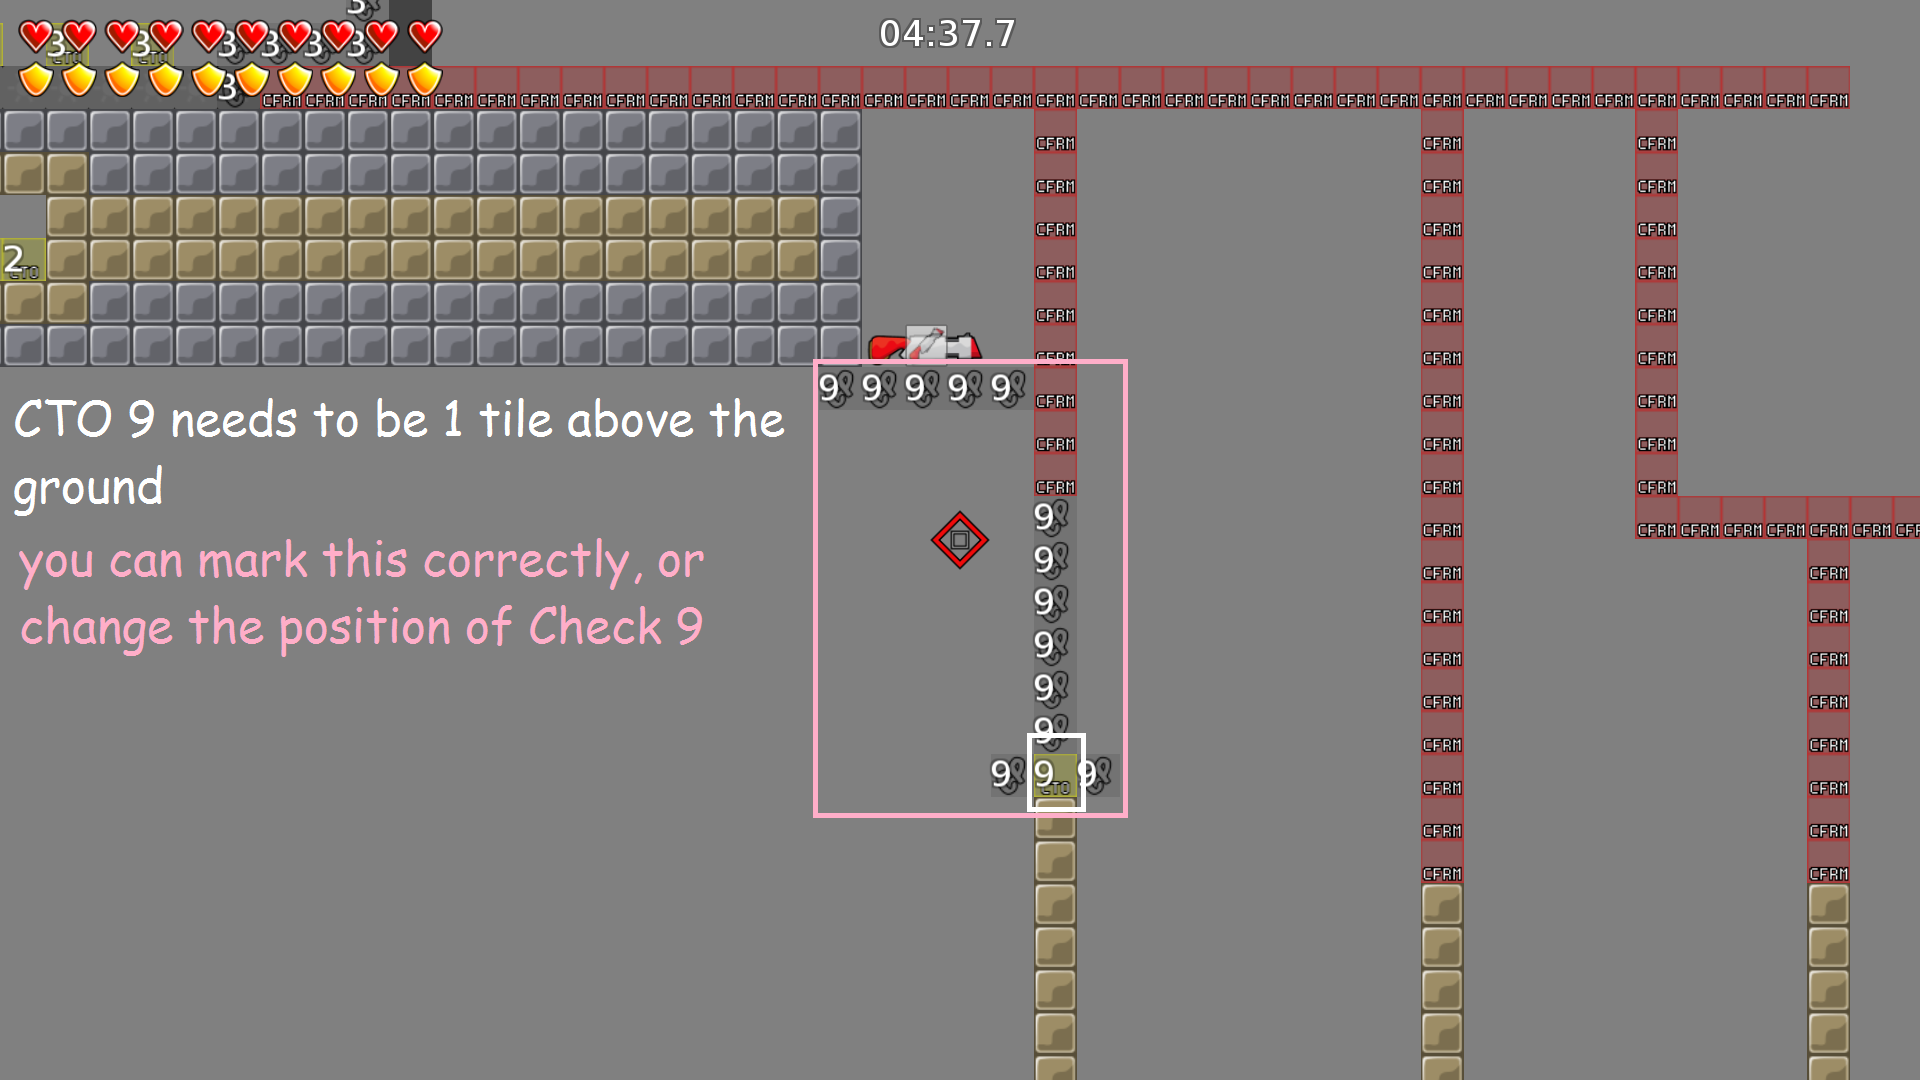 this checkpoints are bad marked, i would make a<br />suggestion to make a new position of this CHECK 9